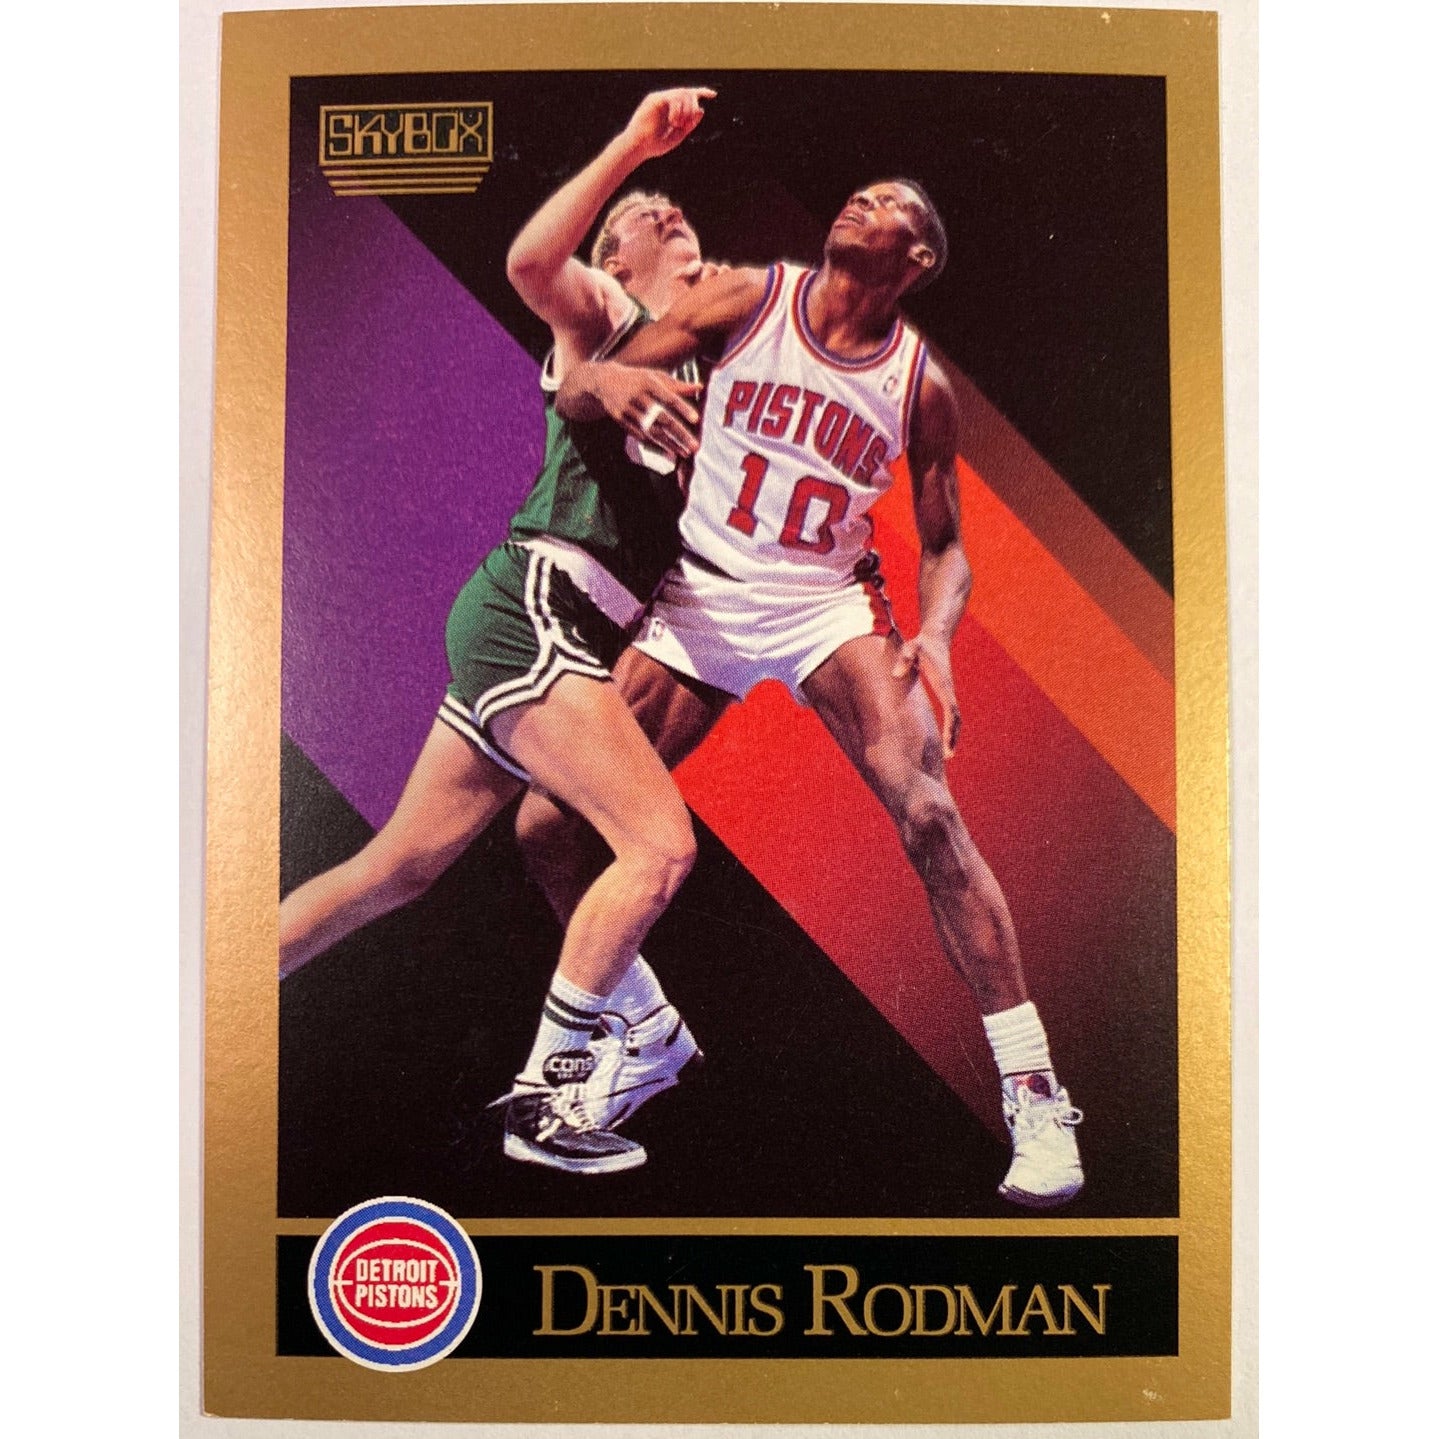  1990-91 Skybox Denis Rodman  Local Legends Cards & Collectibles